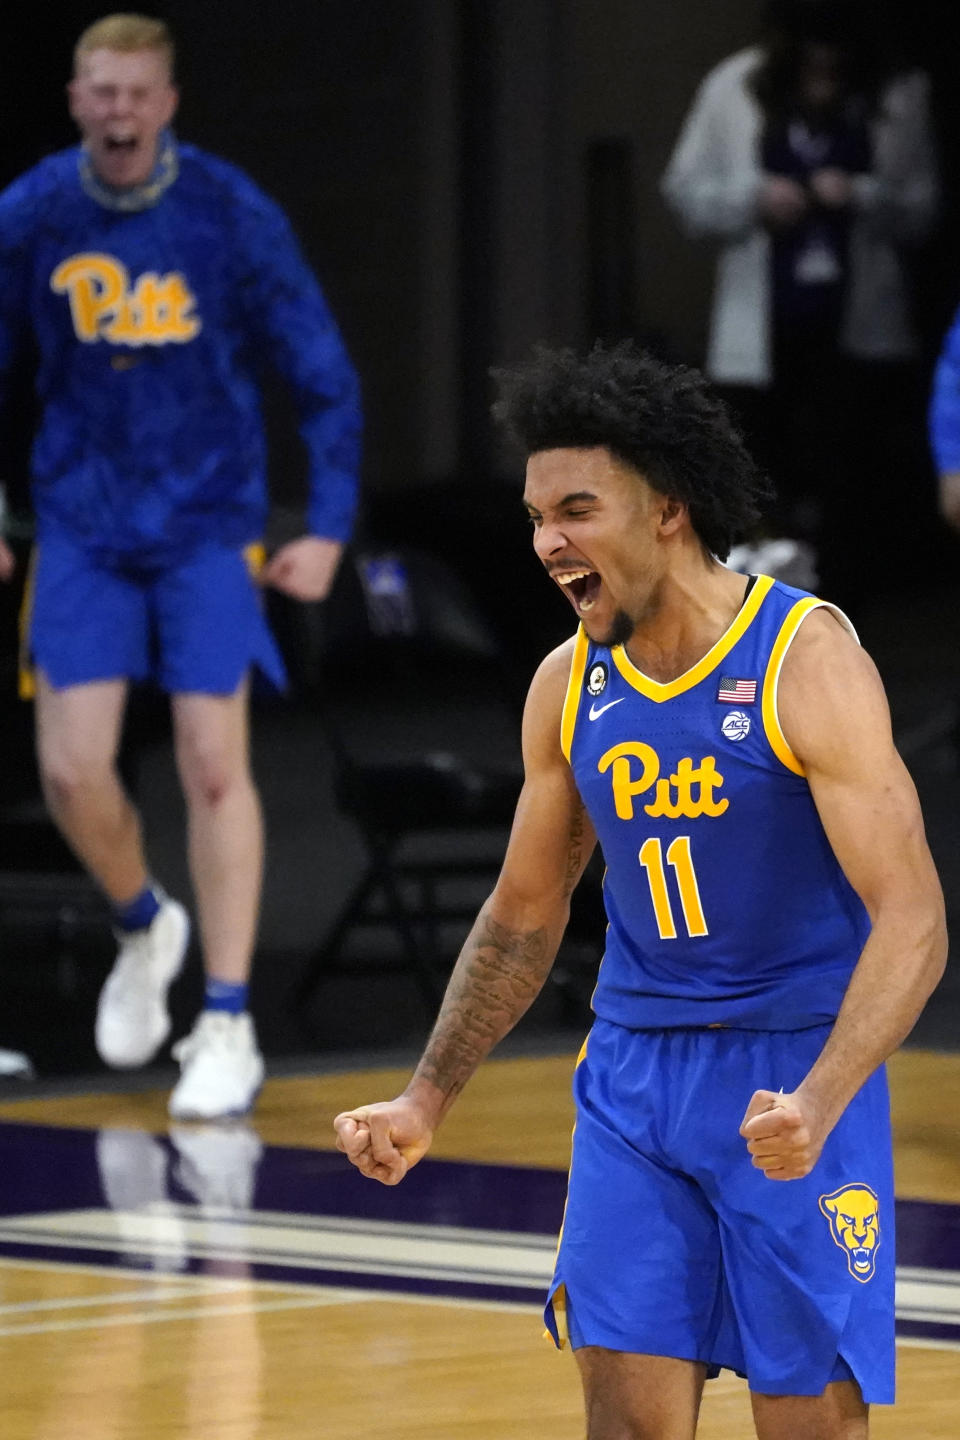 Pittsburgh guard/forward Justin Champagnie (11) reacts after scoring a basket against Northwestern during the second half of an NCAA college basketball game in Evanston, Ill., Wednesday, Dec. 9, 2020. Pittsburgh won 71-70. (AP Photo/Nam Y. Huh)